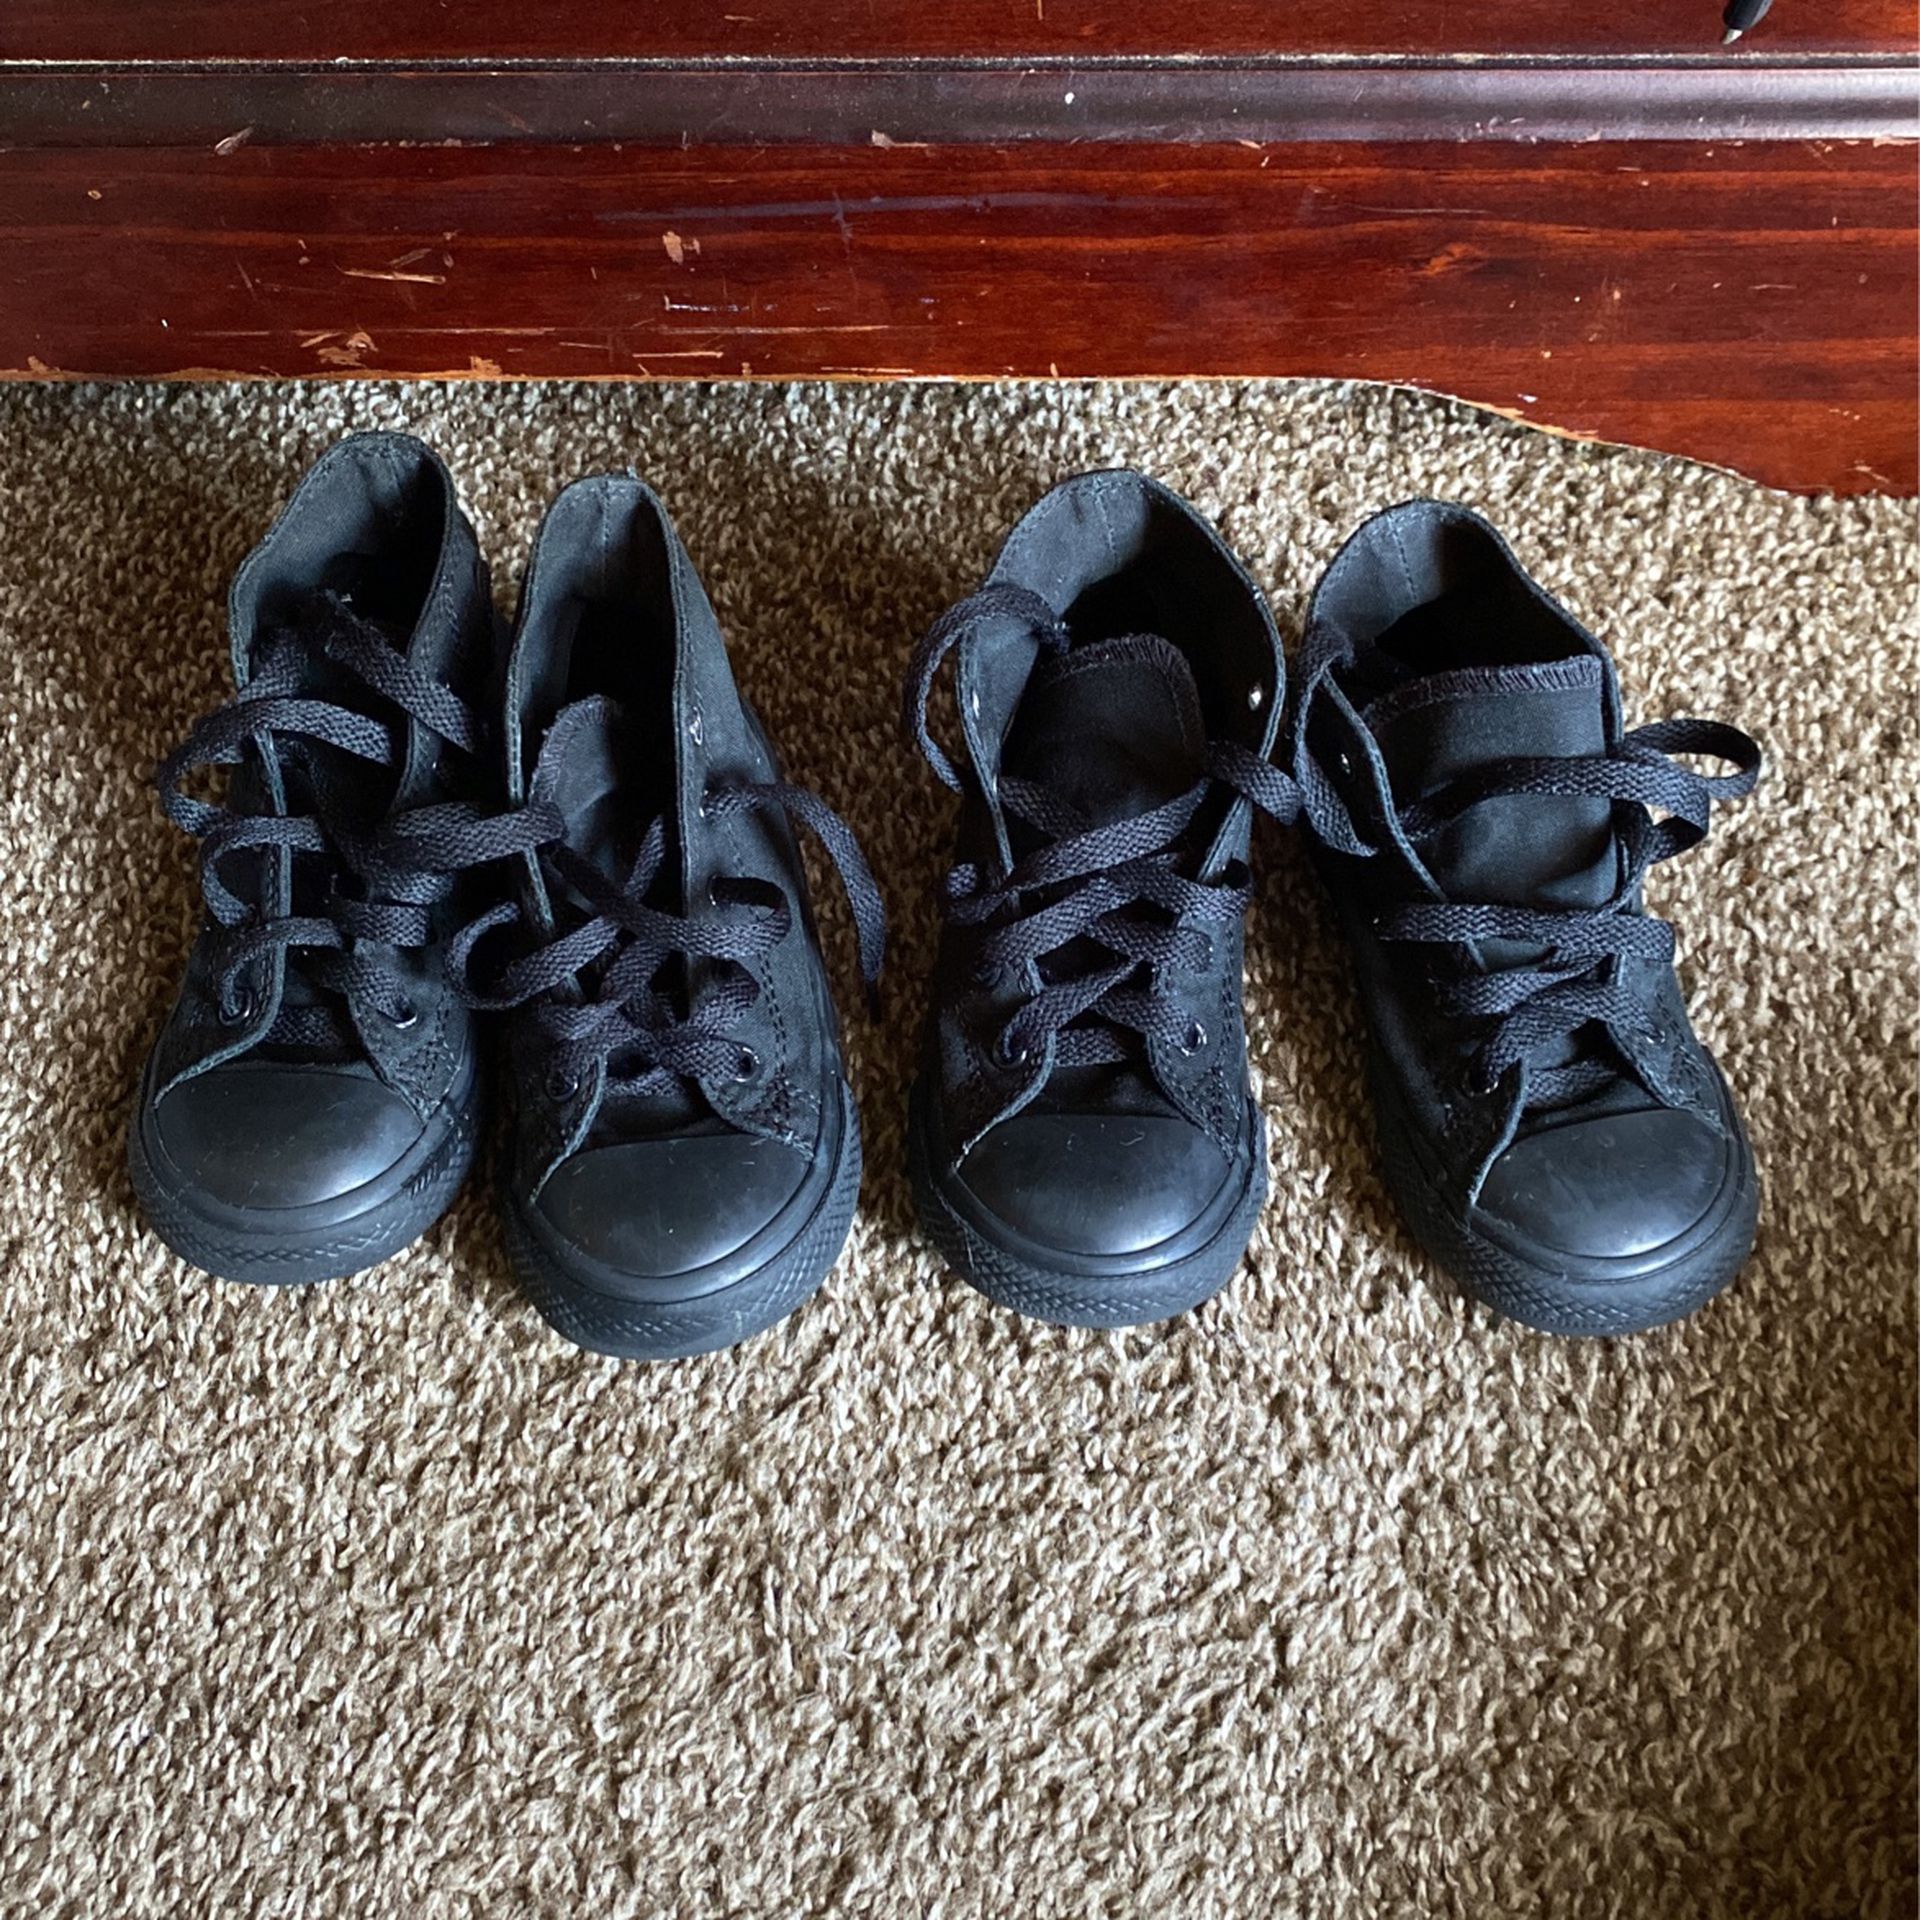 Converse All Star For Kids each pair of shoes 15$